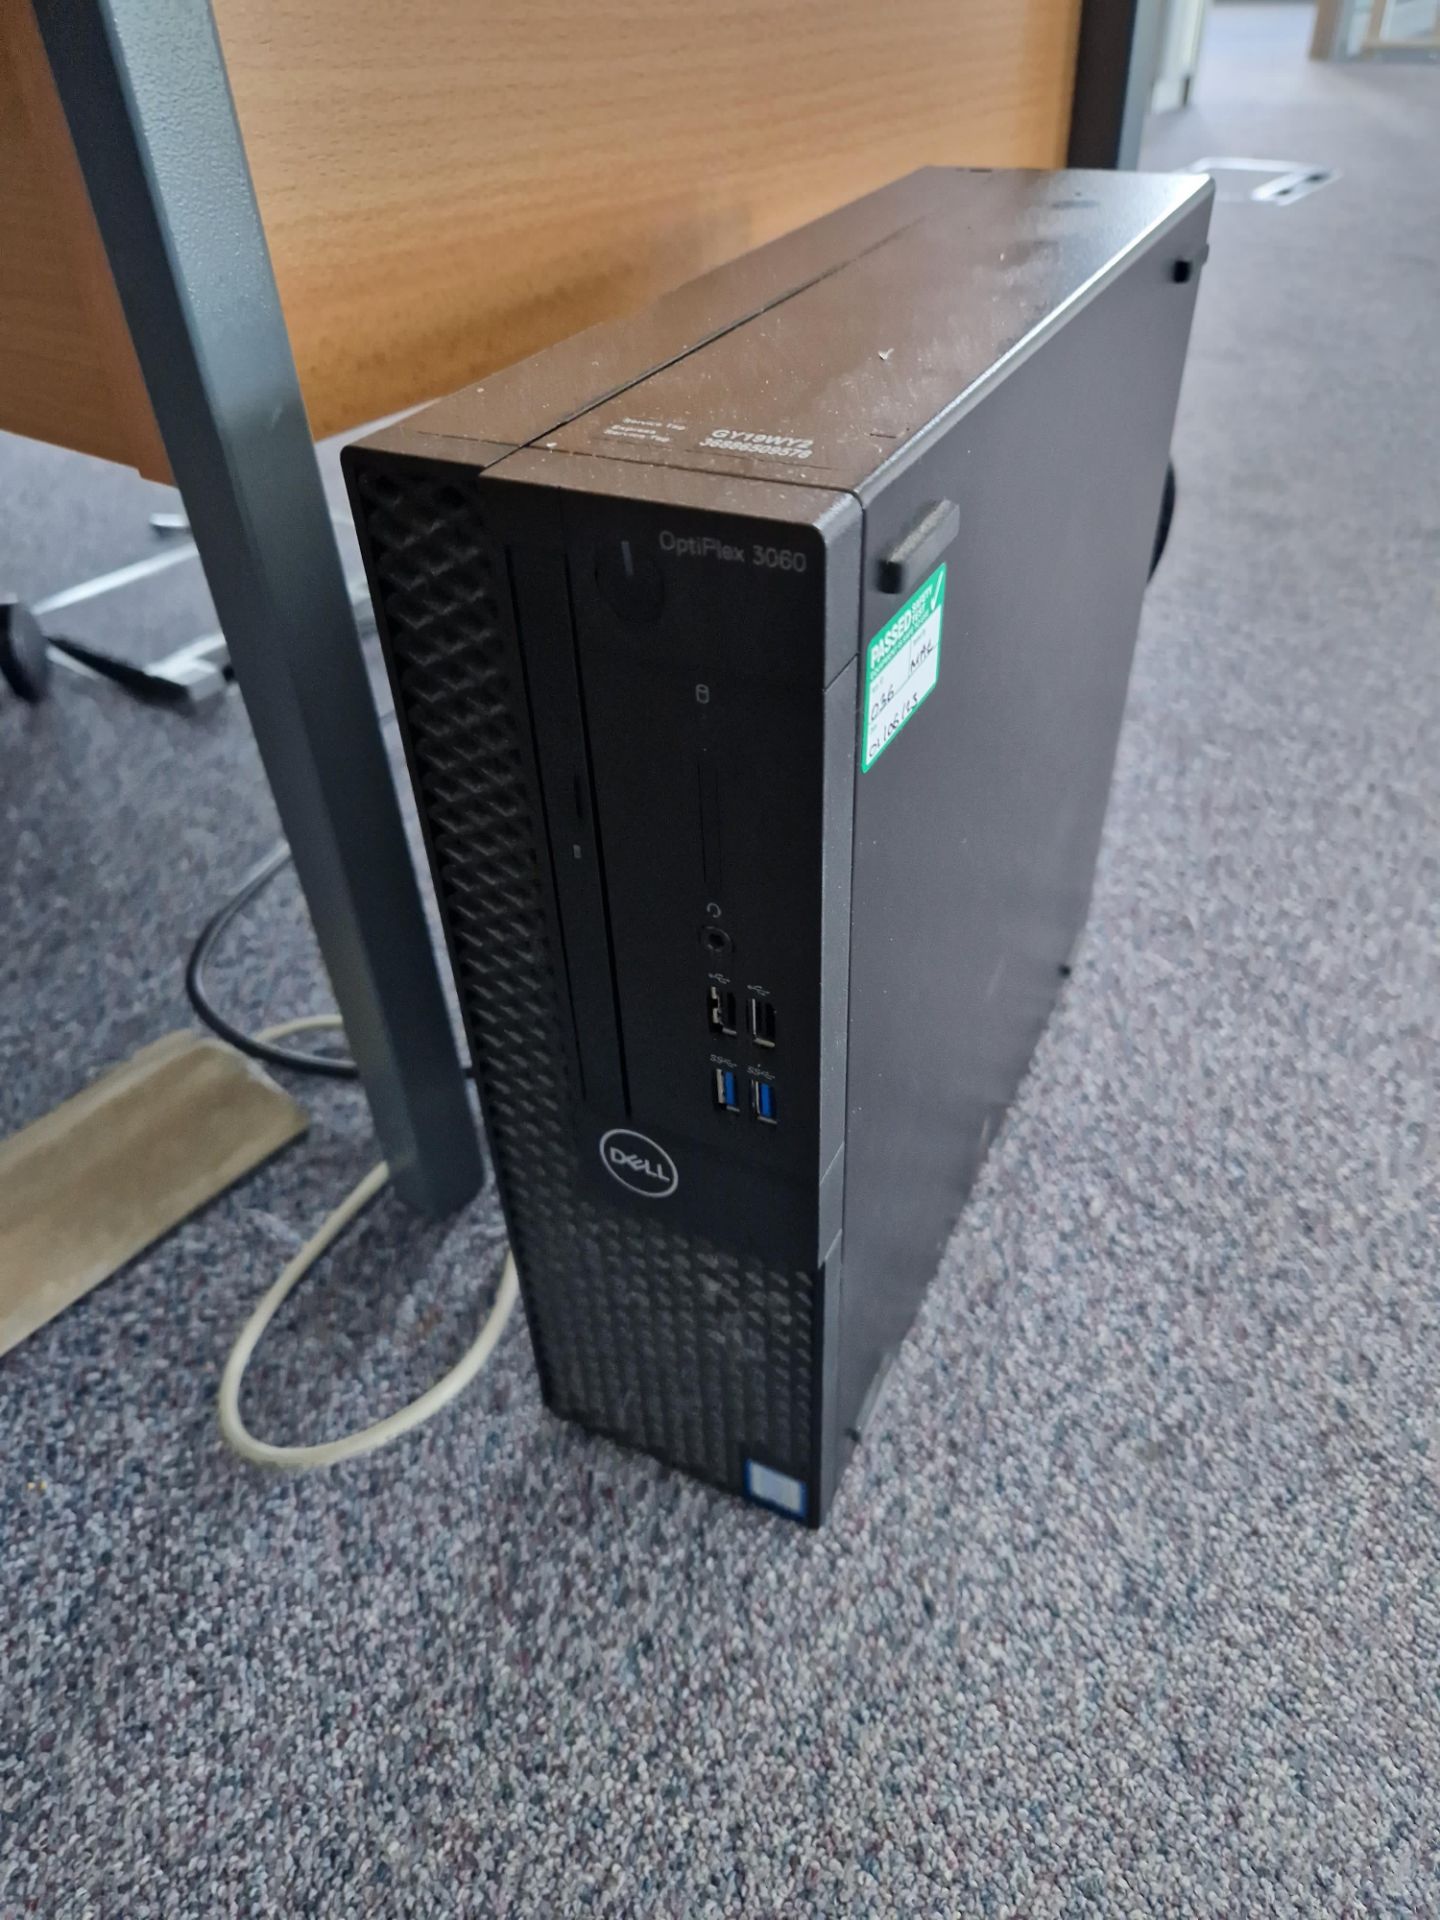 Dell OptiPlex 3060 Core i5 Desktop PC, Monitor, Keyboard and Mouse (Hard Drive Removed) Please - Image 2 of 2